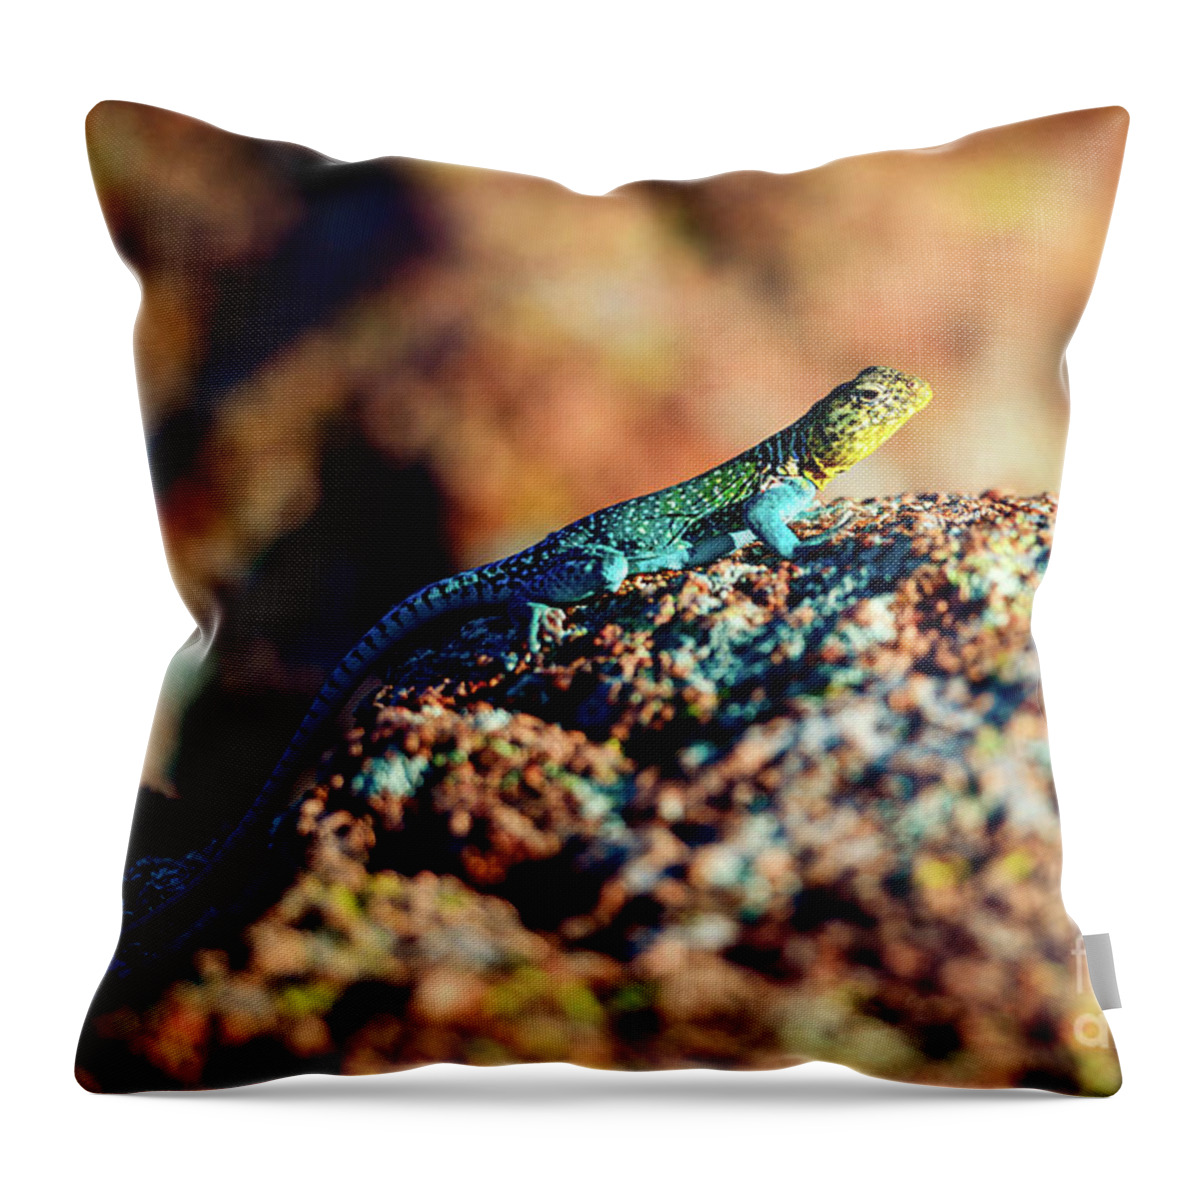 The Collared Lizard Is The Oklahoma State Reptile. Throw Pillow featuring the photograph Collared Lizard by Tamyra Ayles